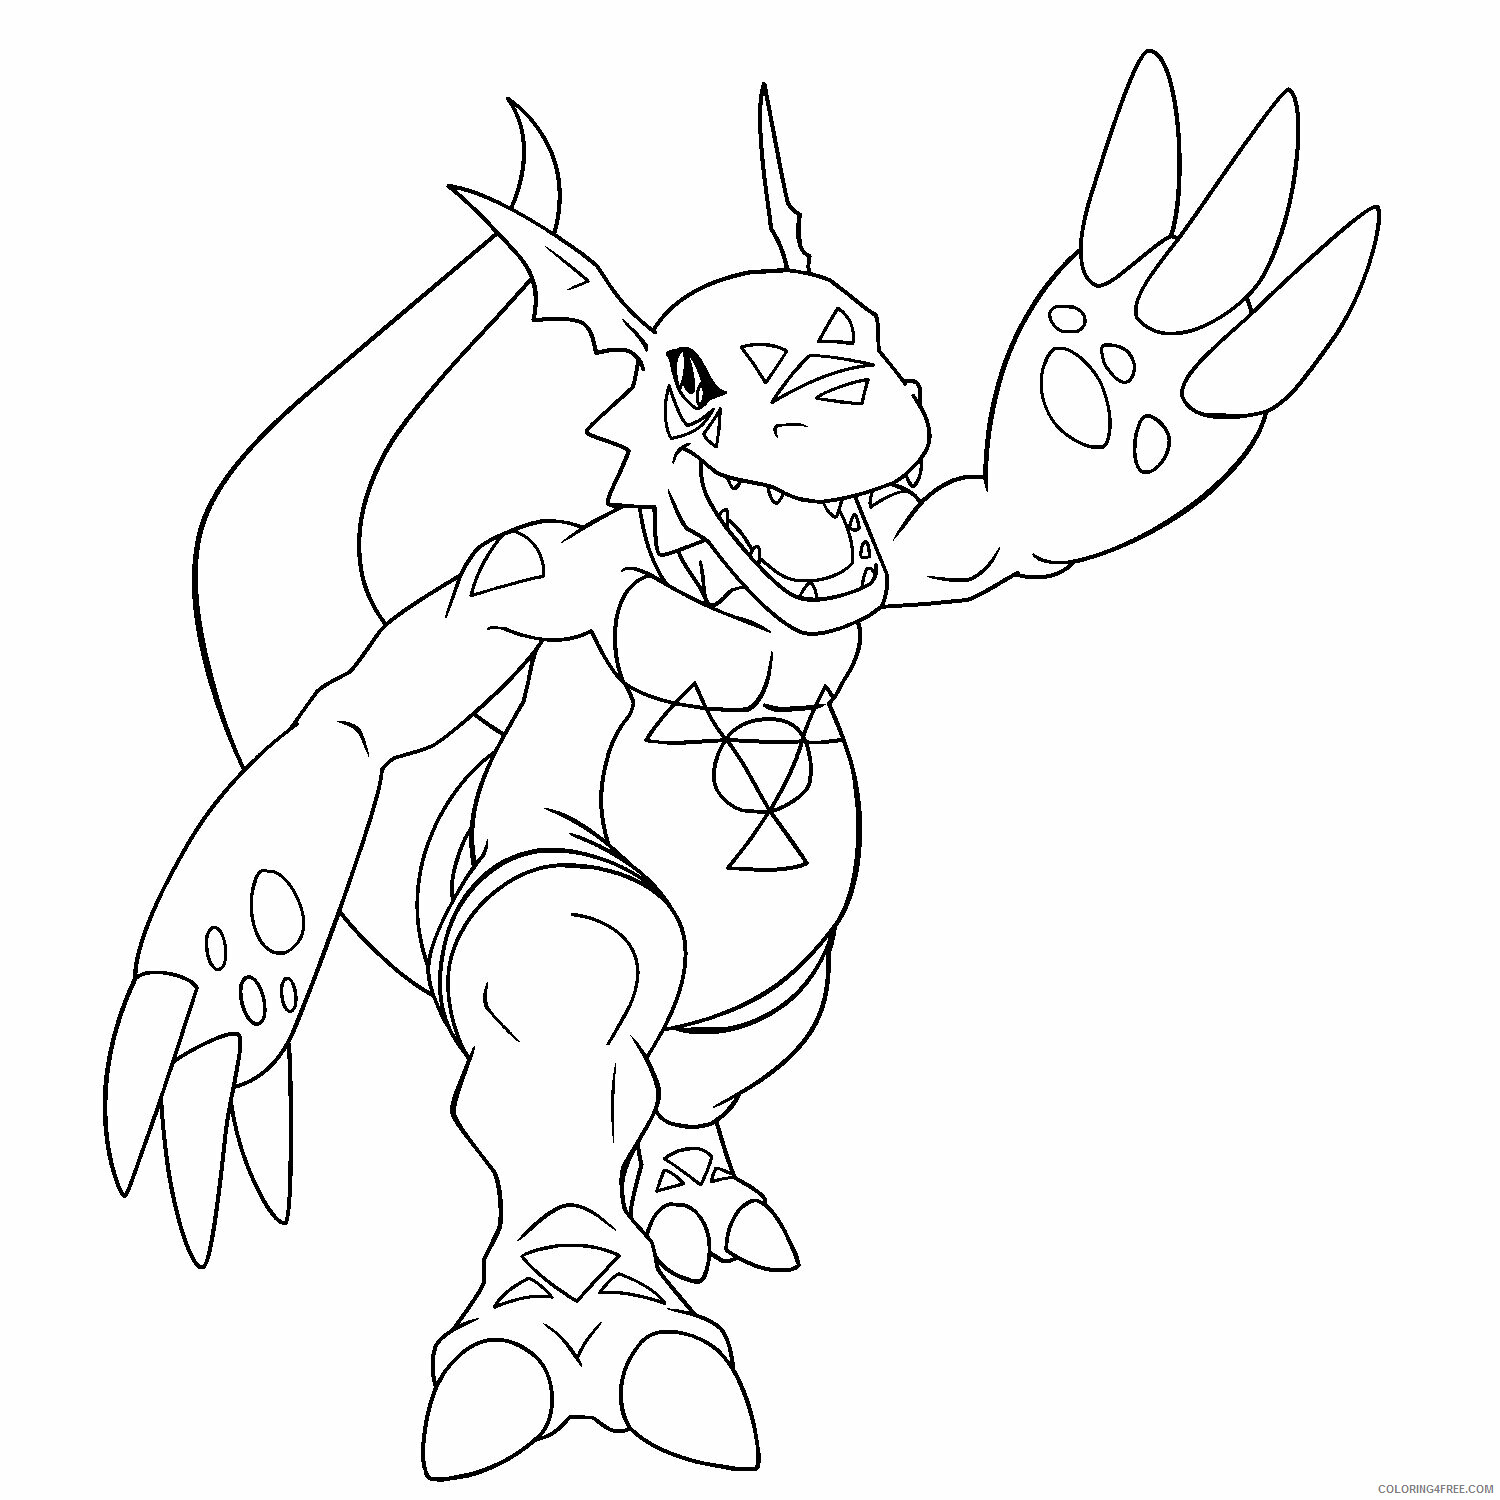 Digimon Printable Coloring Pages Anime digimon 38 2021 0353 Coloring4free